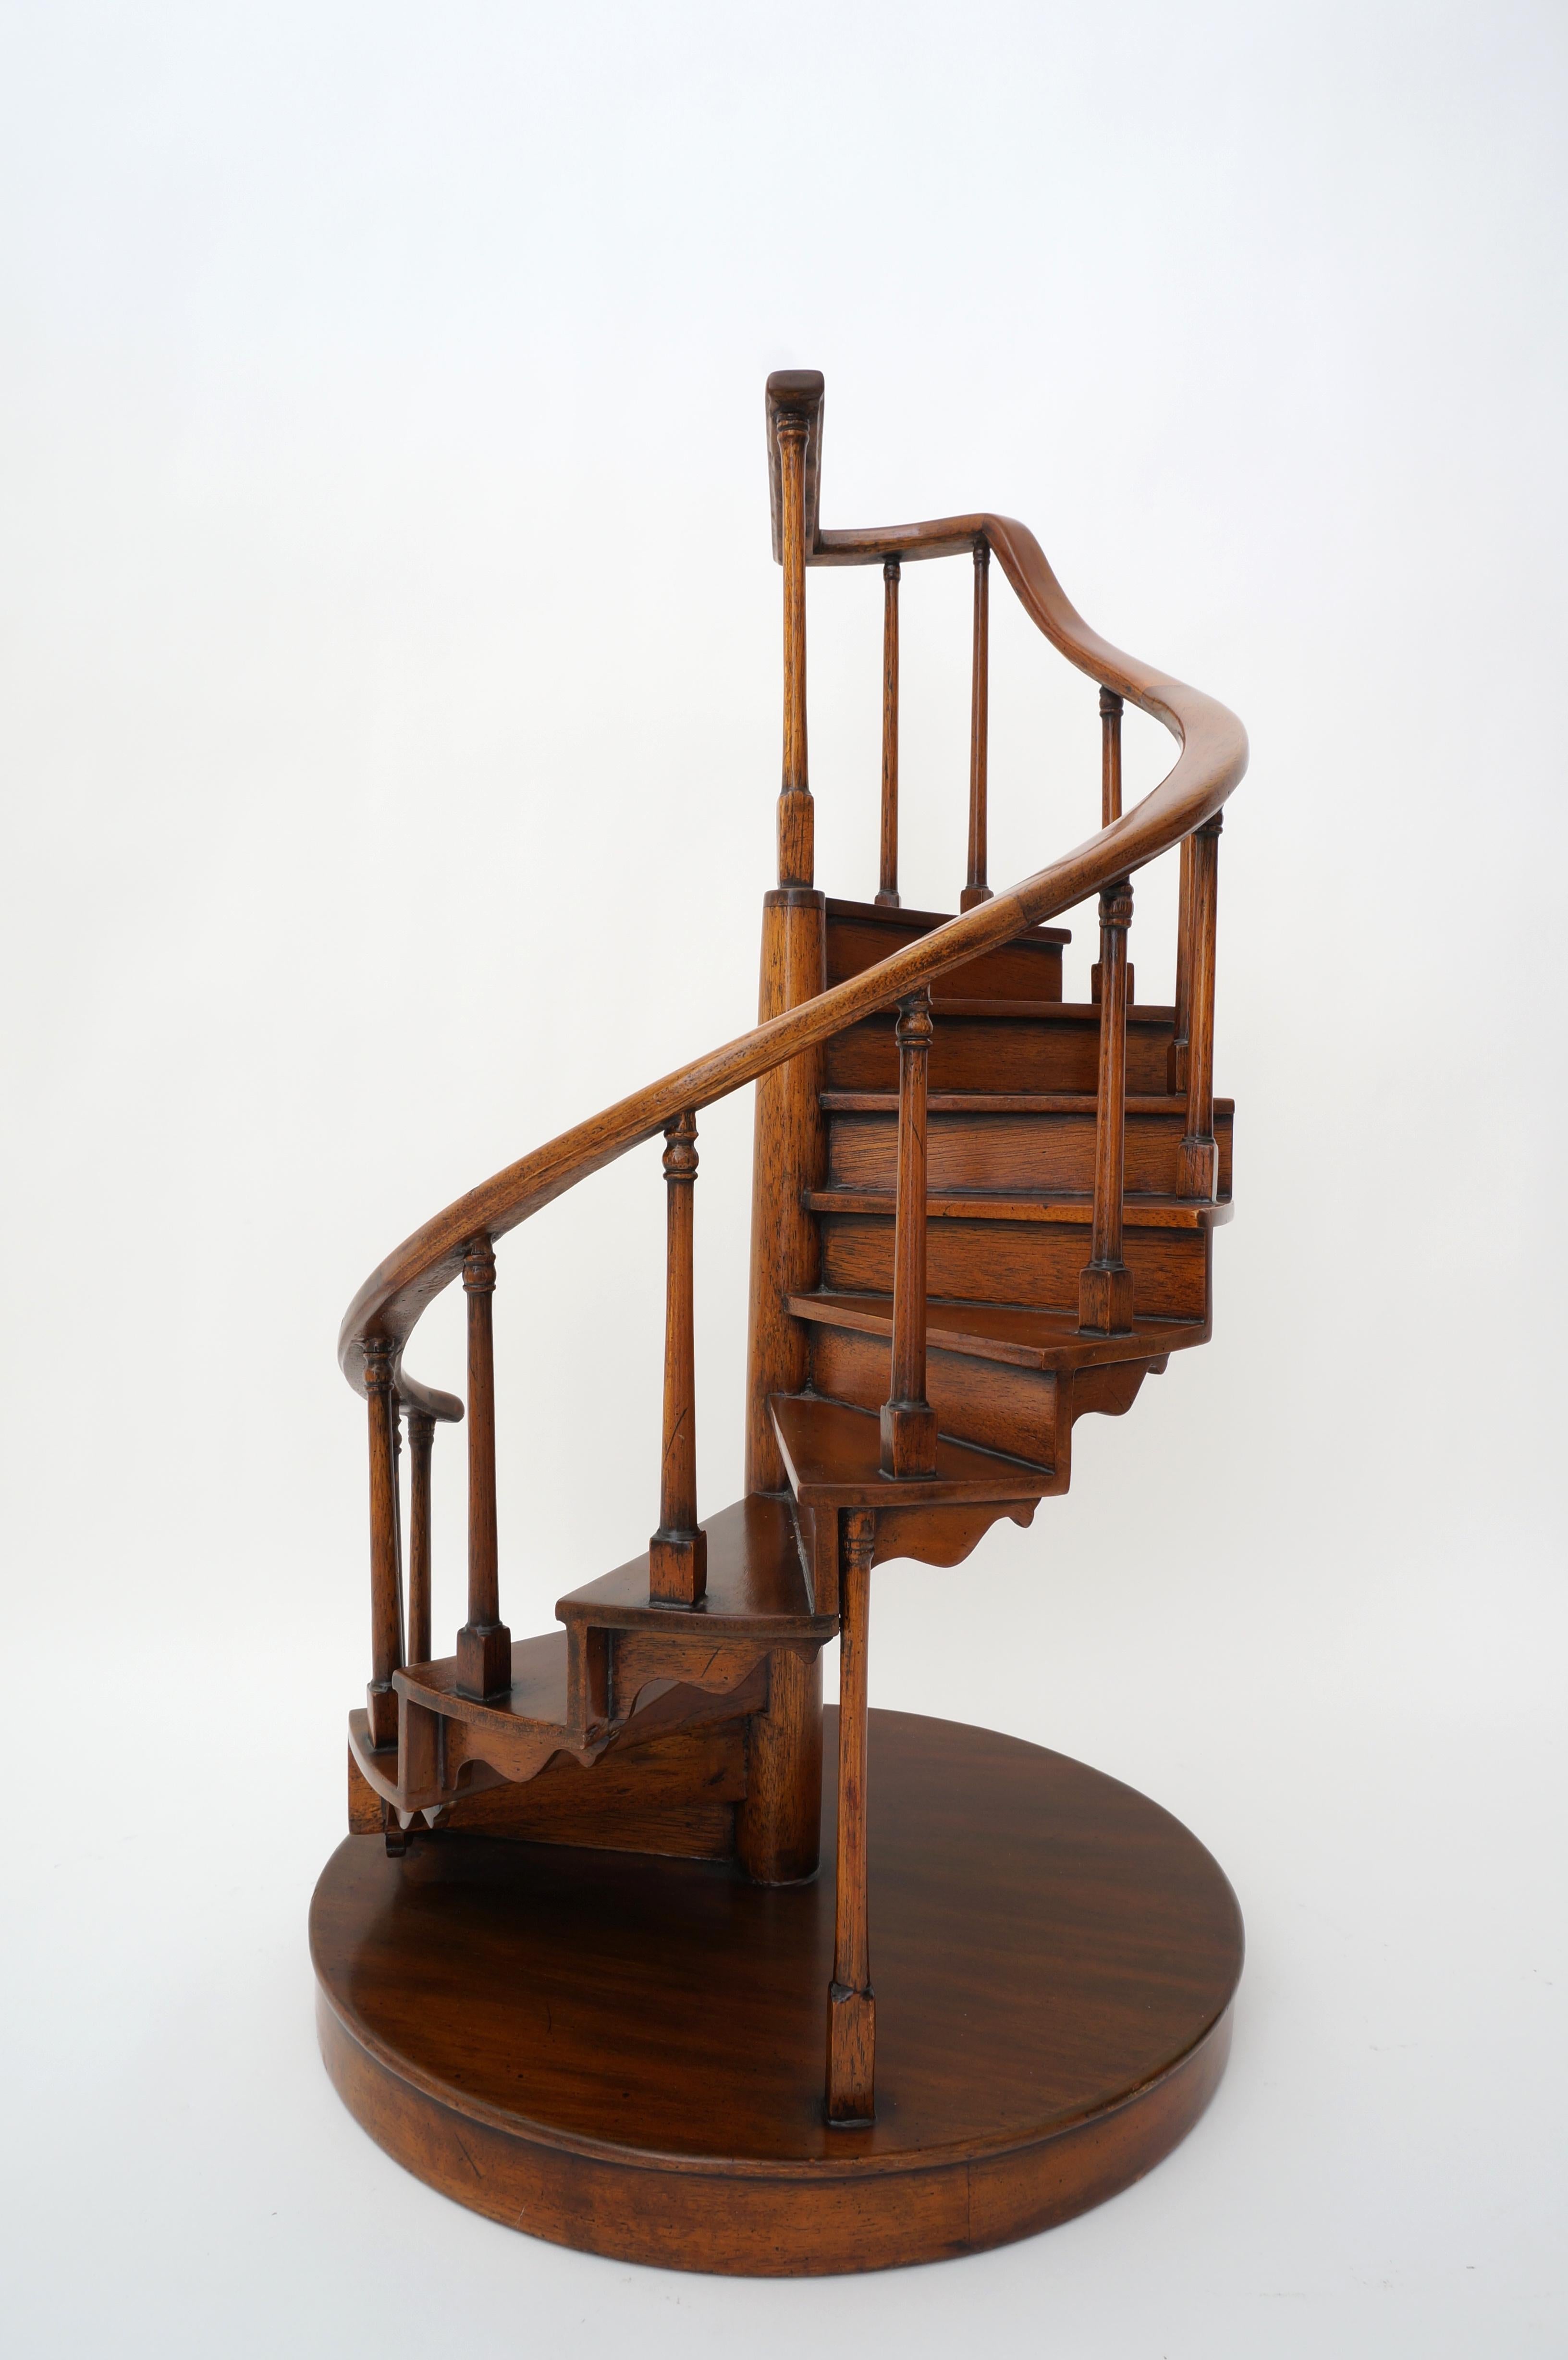 Hand-Crafted Spiral Staircase Architectural Model in Mahogany